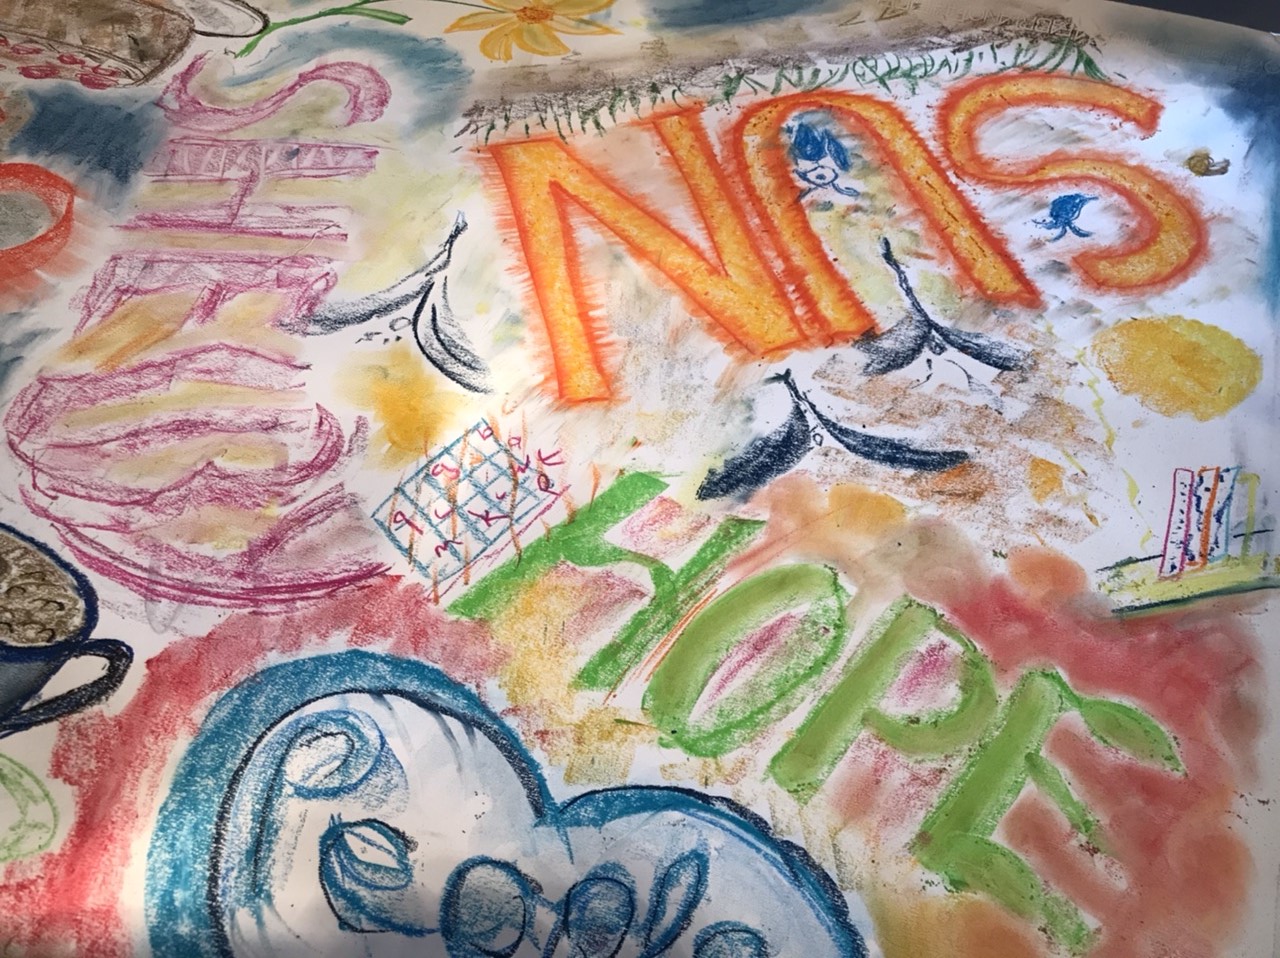 A photo from one of the taster workshops. For this workshop, the group were trying pastels. In this photo, a large piece of paper has been covered in drawings in pastel, including images of coffee cups, flowers and words like "sun" and "hope".